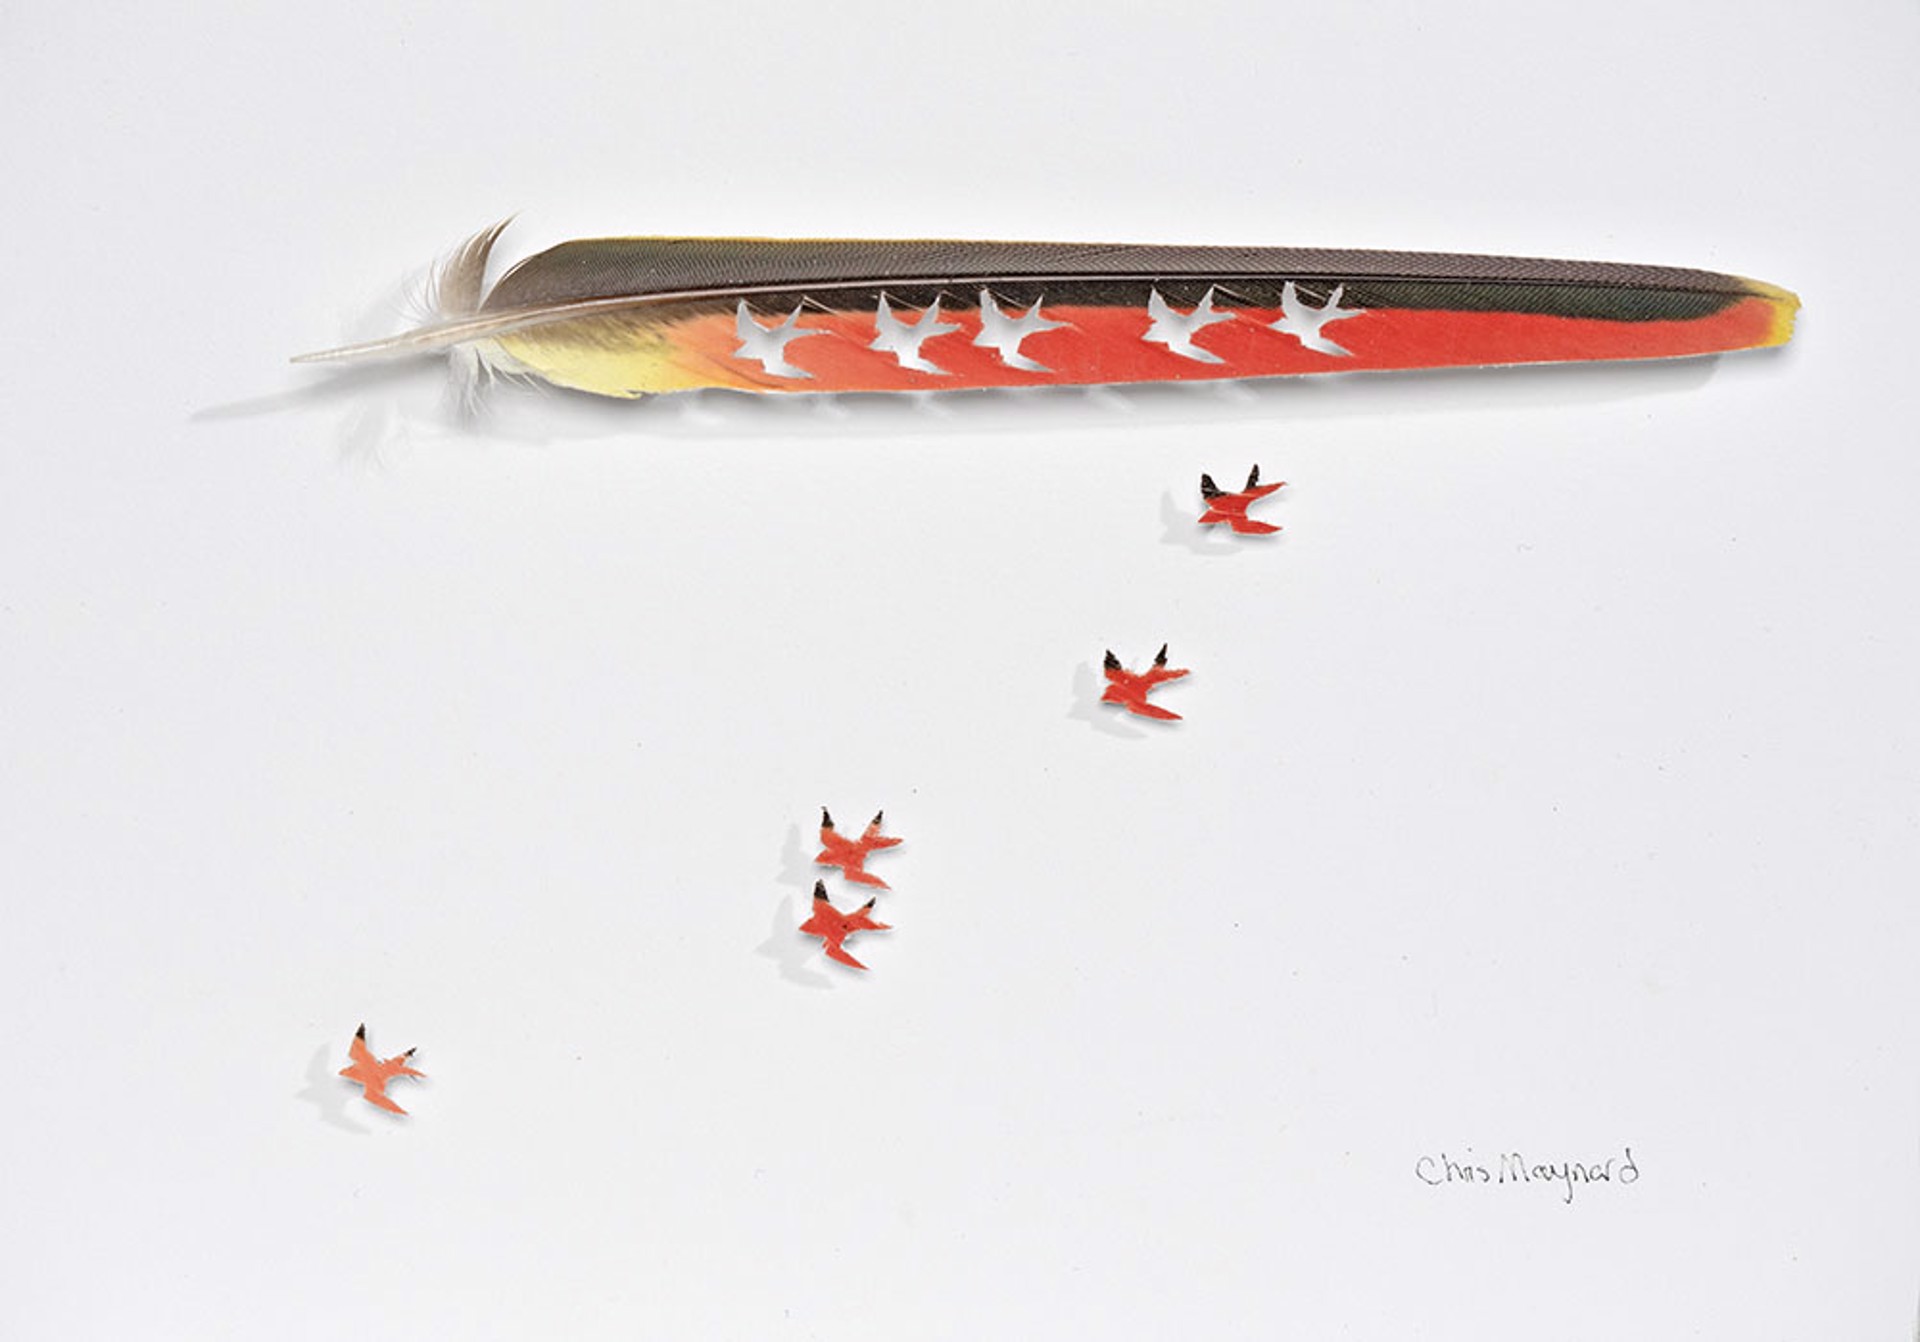 Five Little Red Swallows by Chris Maynard